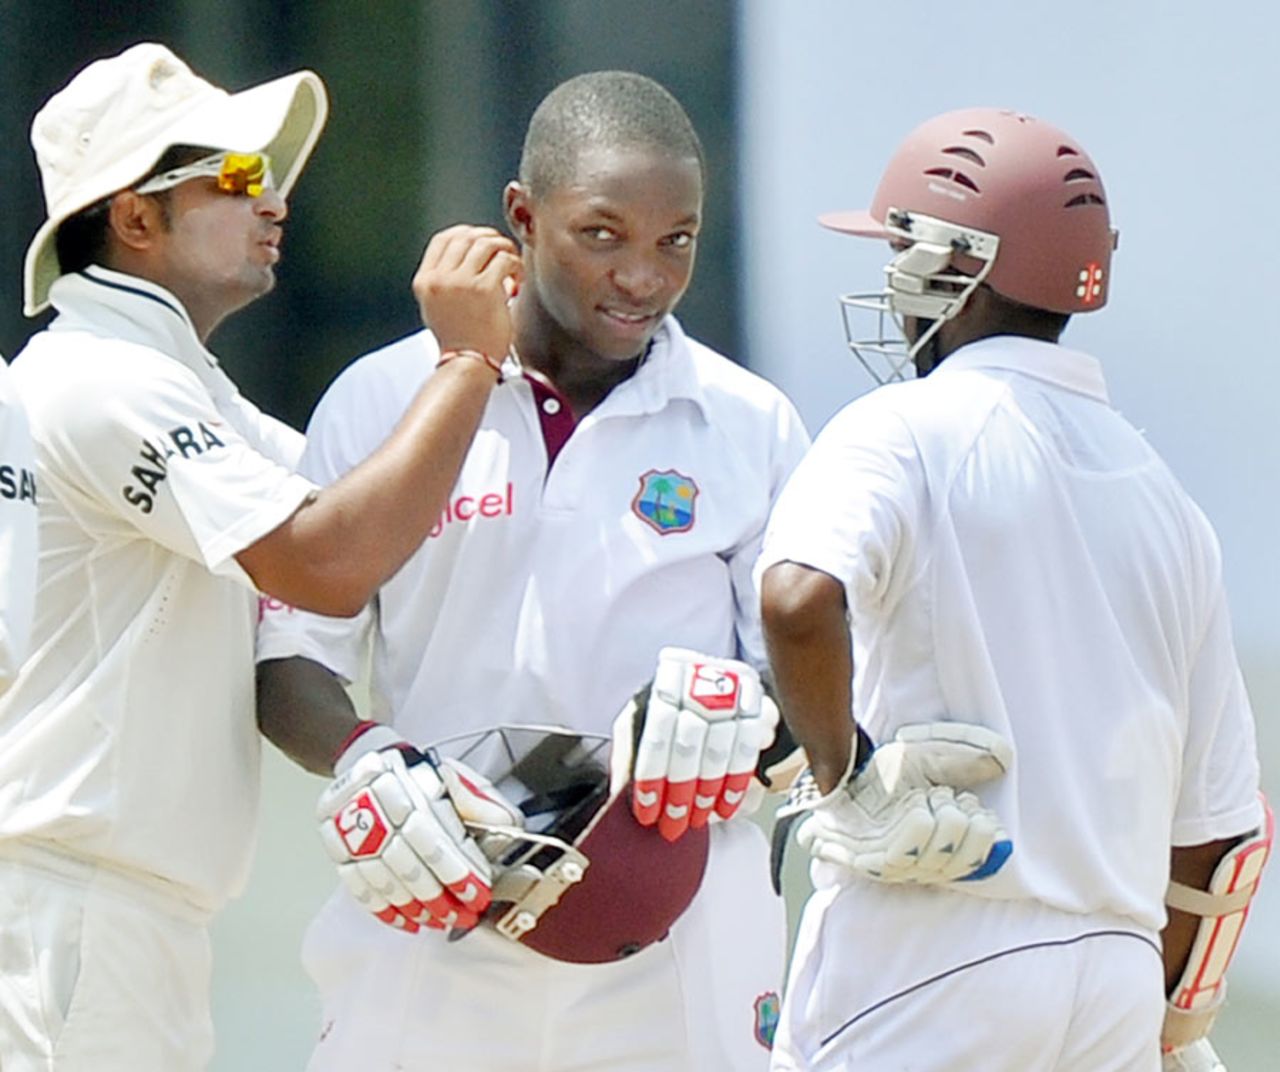 Suresh Raina checks the extent of injury after Fidel Edwards was struck by a bouncer, West Indies v India, 3rd Test, Dominica, 5th day, July 10, 2011